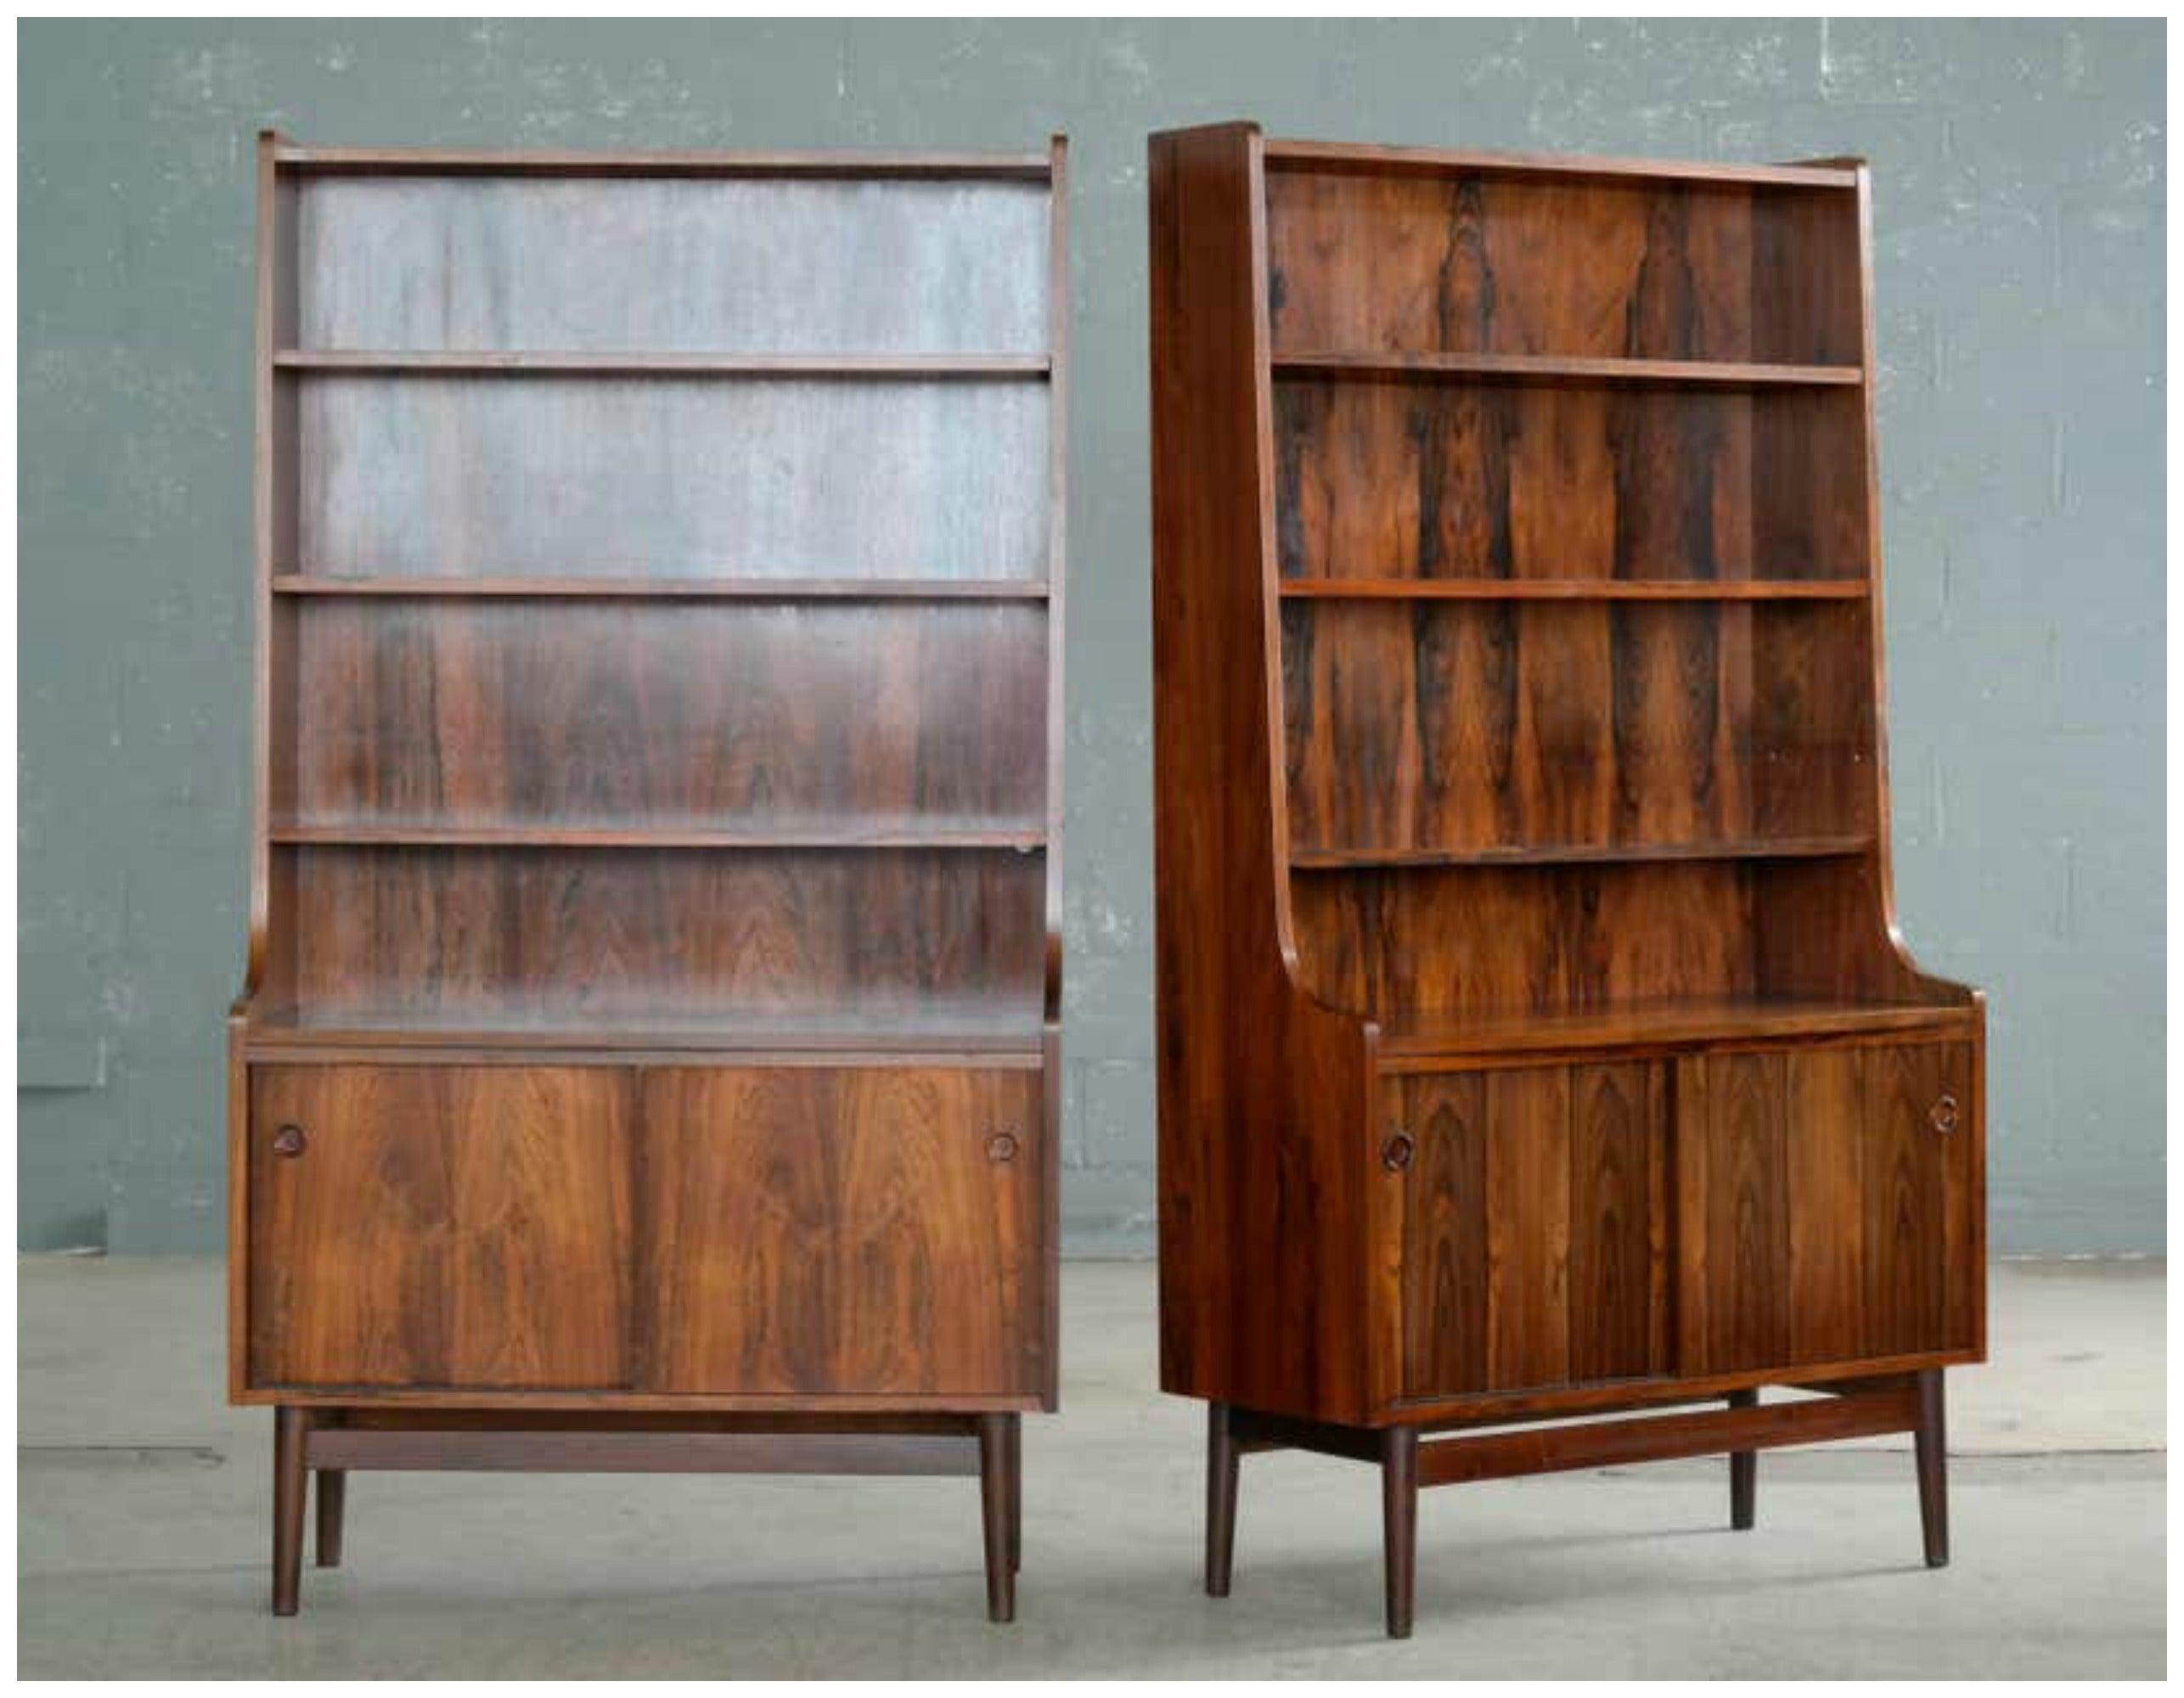 Scandinavian Modern 1960s Danish Modern Midcentury Pair of Bookcases in Rosewood by Johannes Sorth